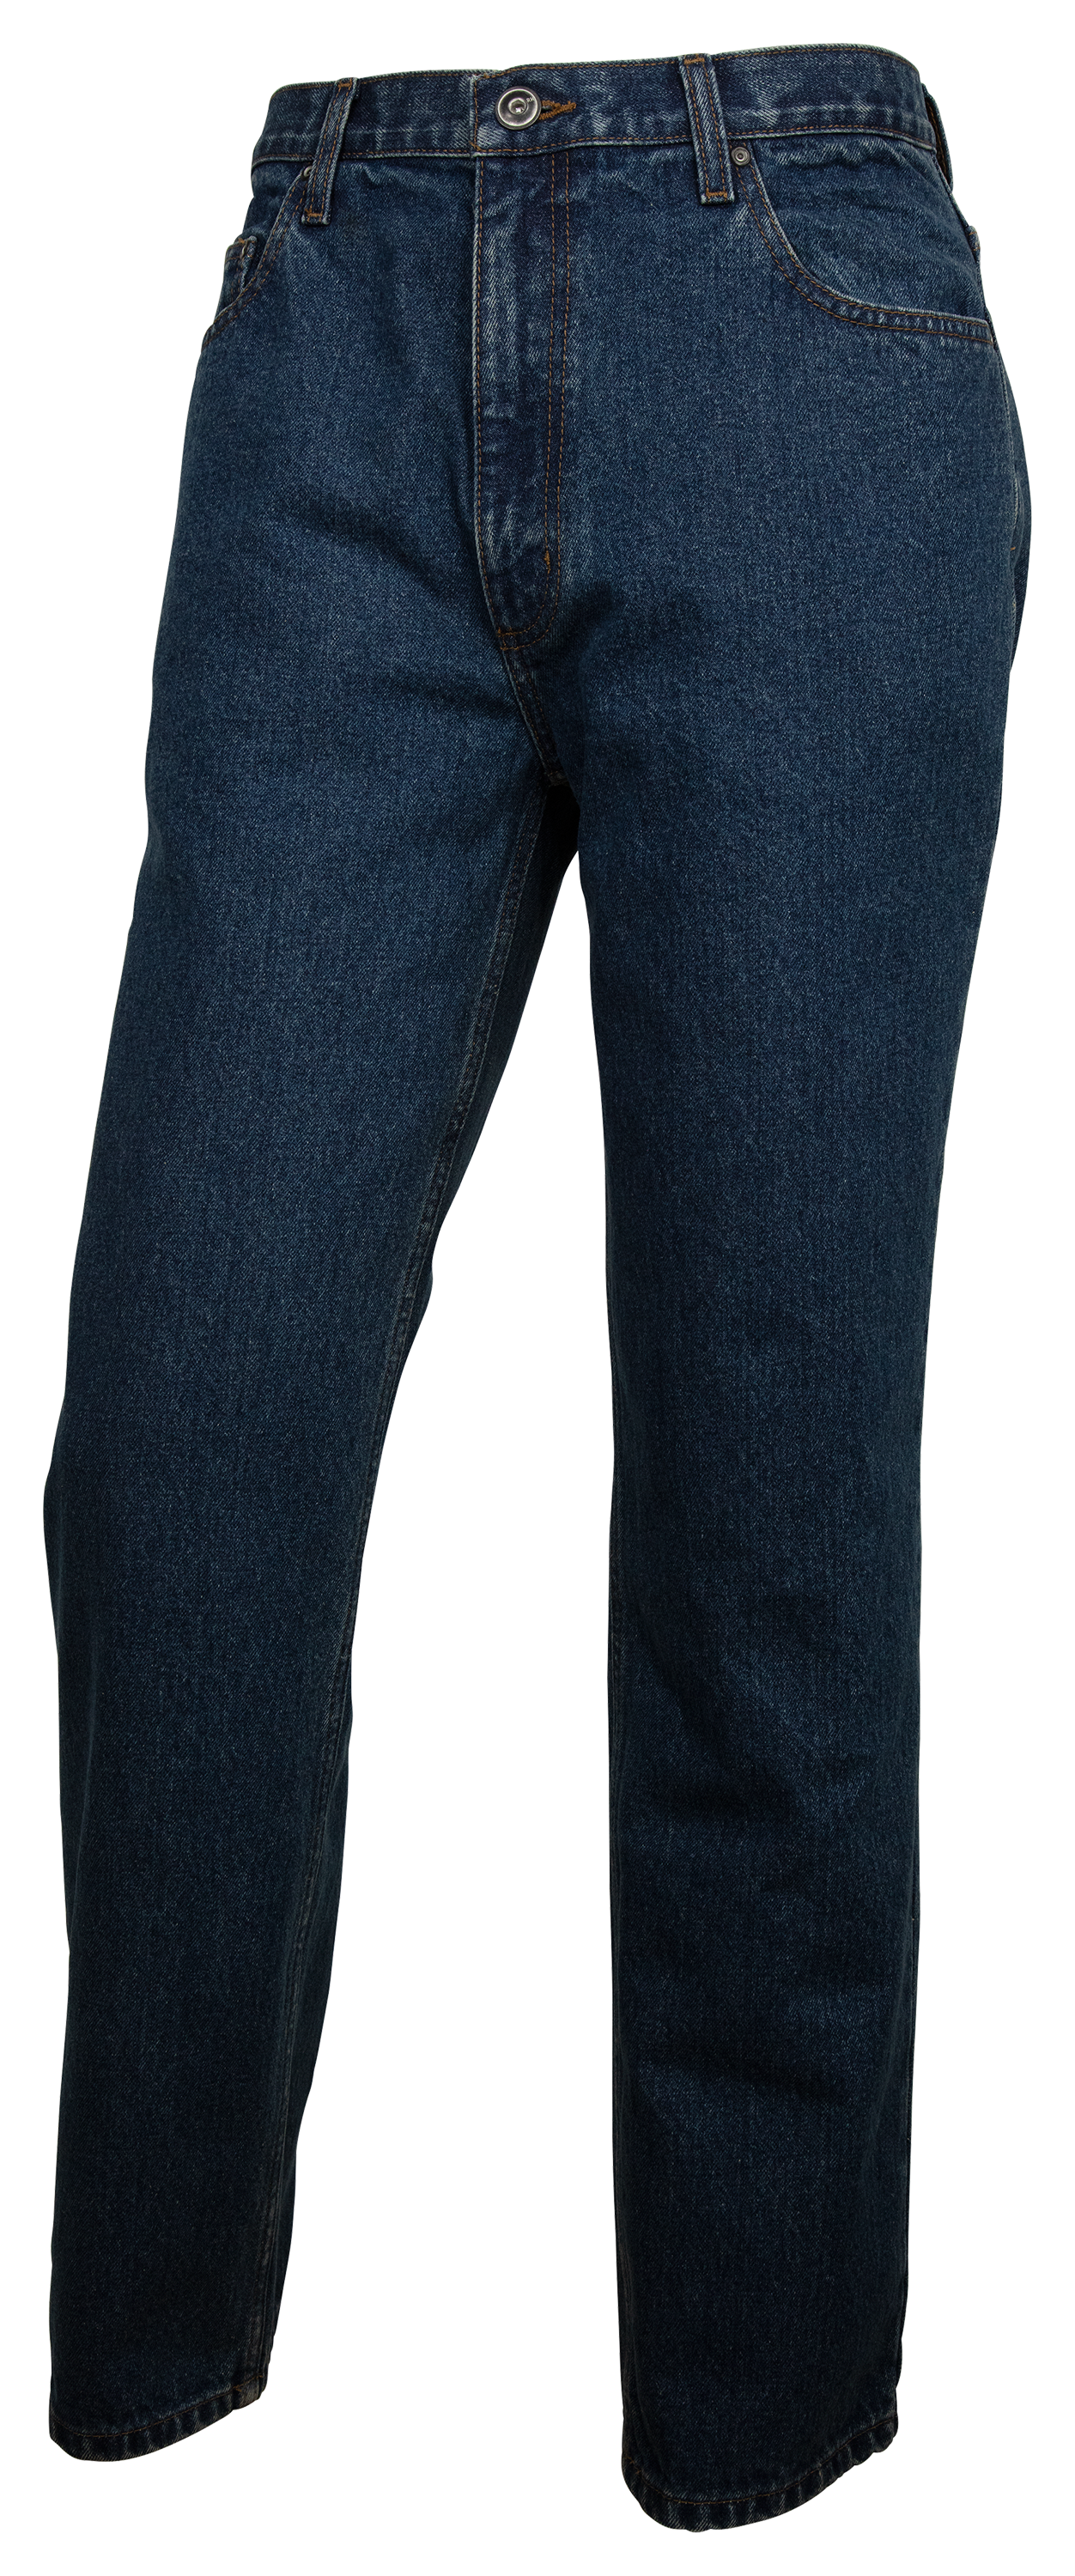 RedHead Relaxed Fit Jeans for Men